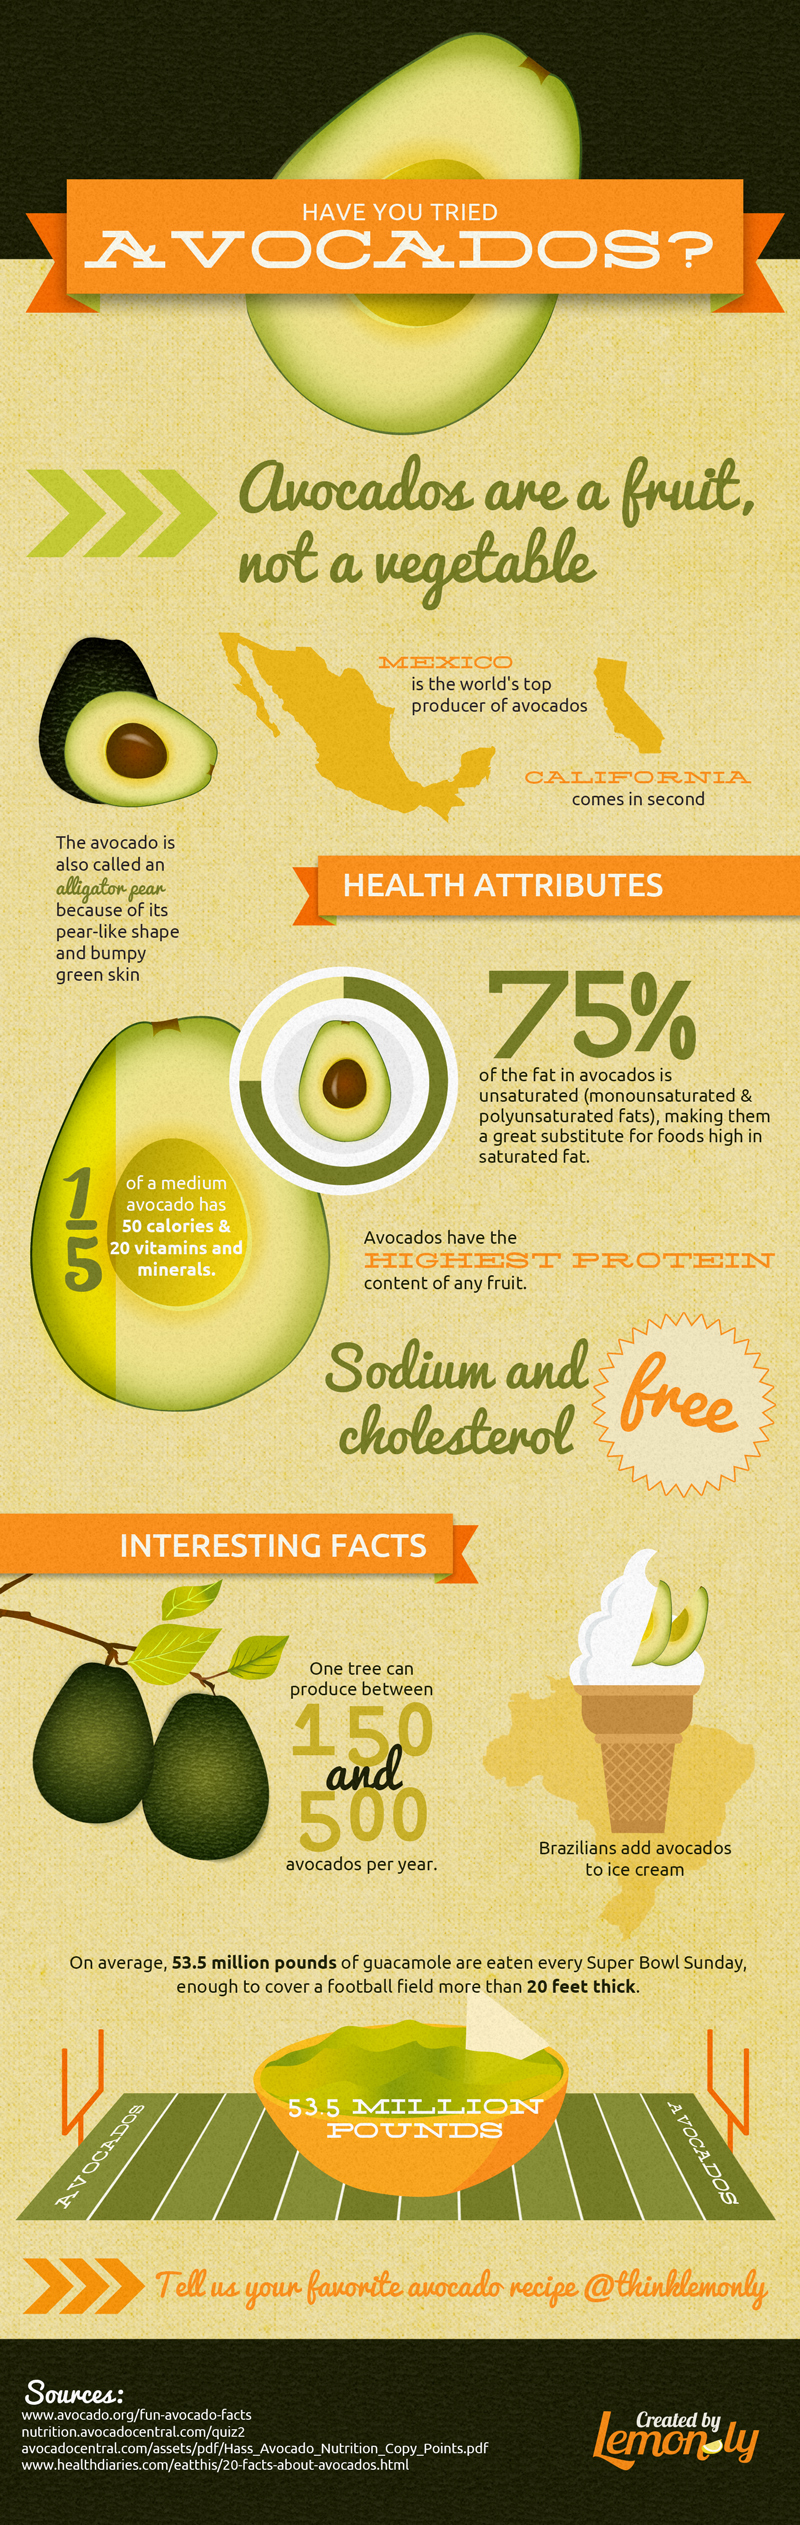 All About Avocados: An Avocado Facts Infographic